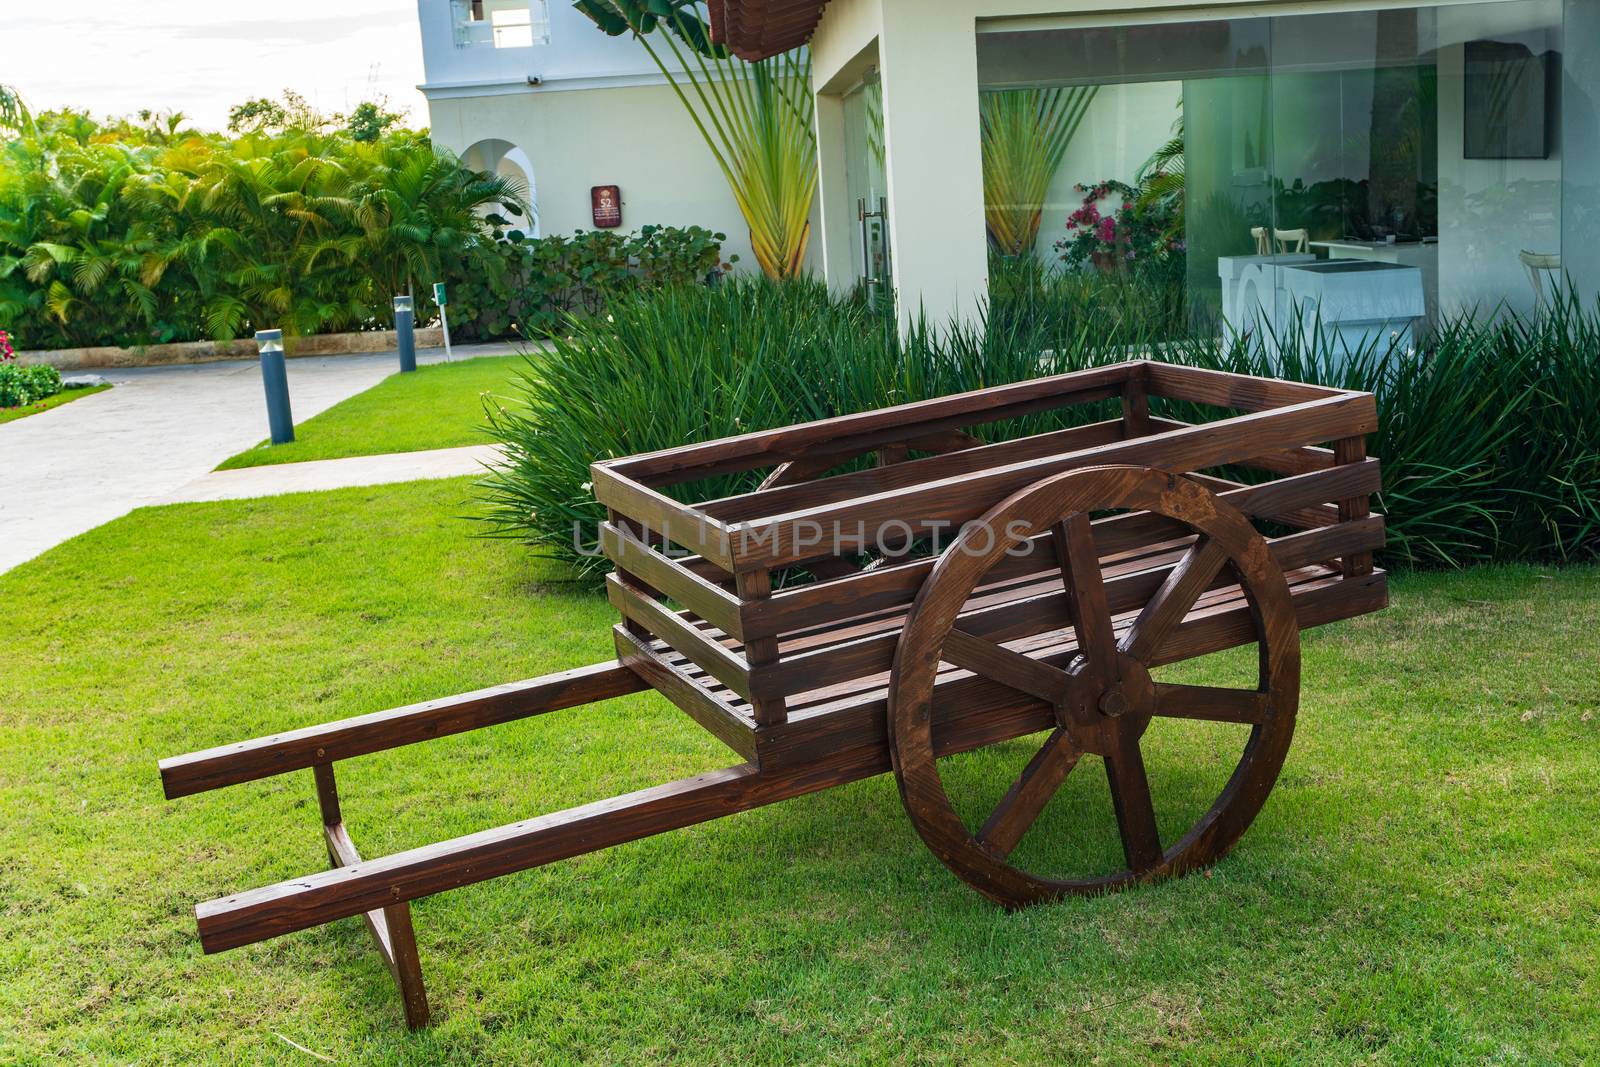 Wooden cart on the green grass lawn in front of the house by ben44